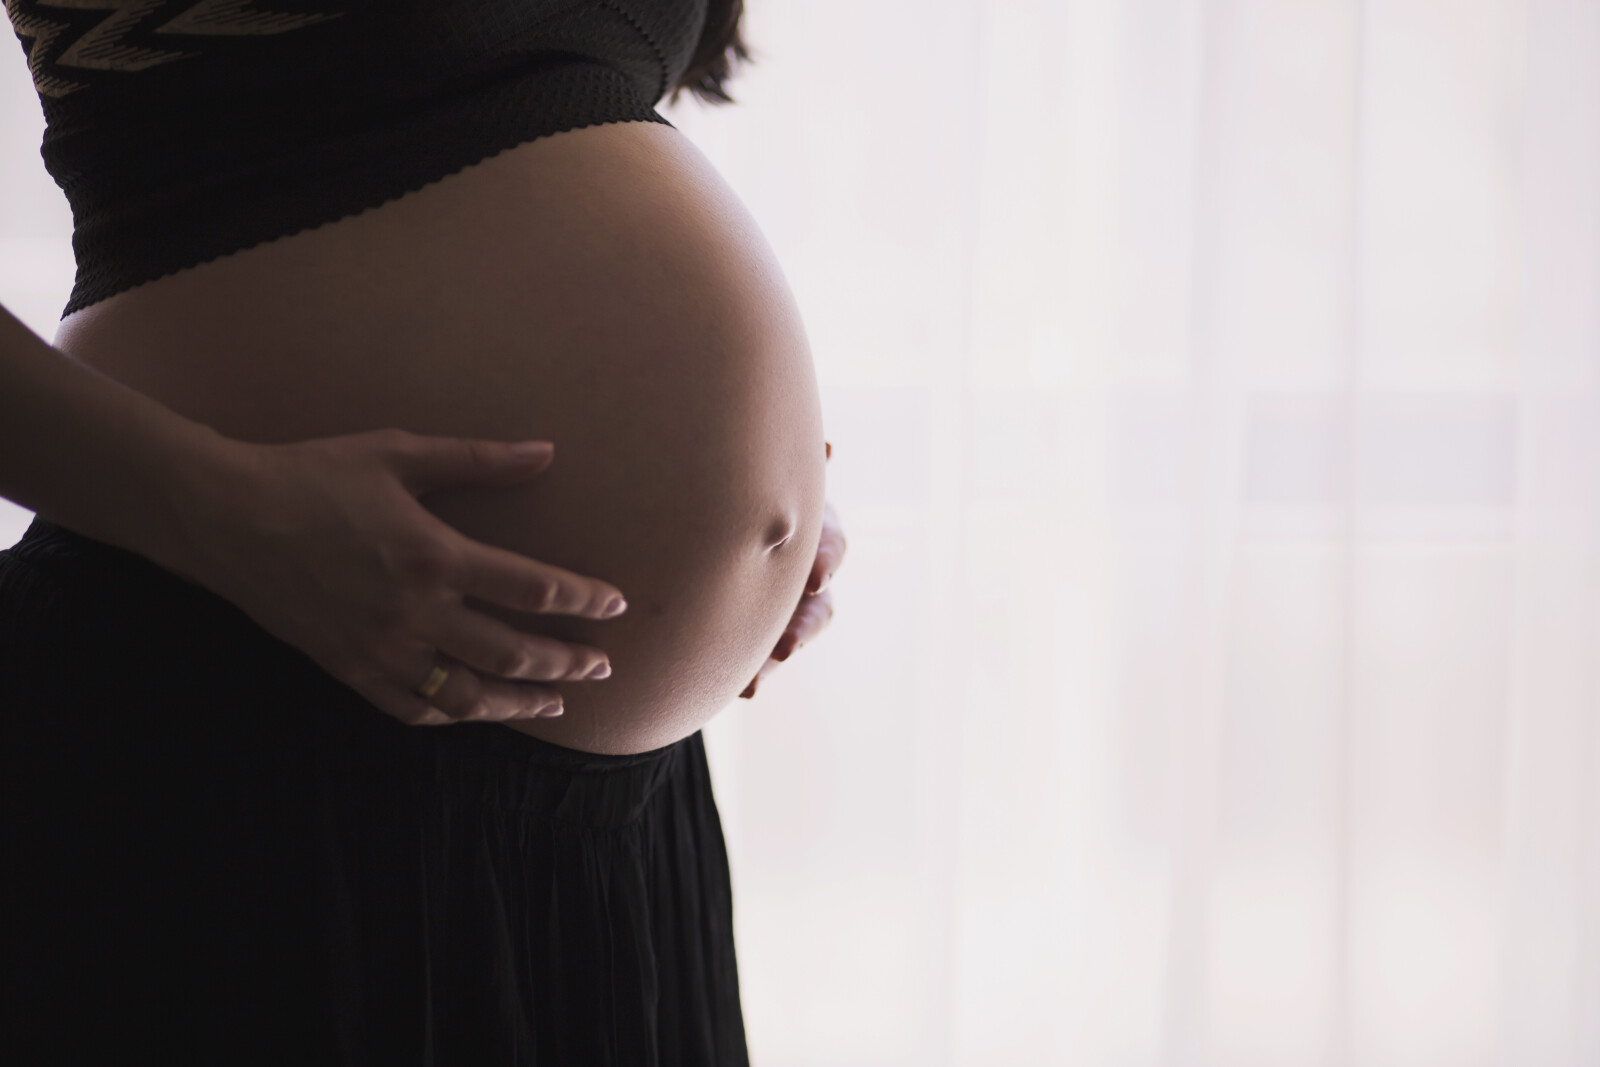 3 Injuries Caused by Slip and Falls While Pregnant: Do You Deserve a Settlement?